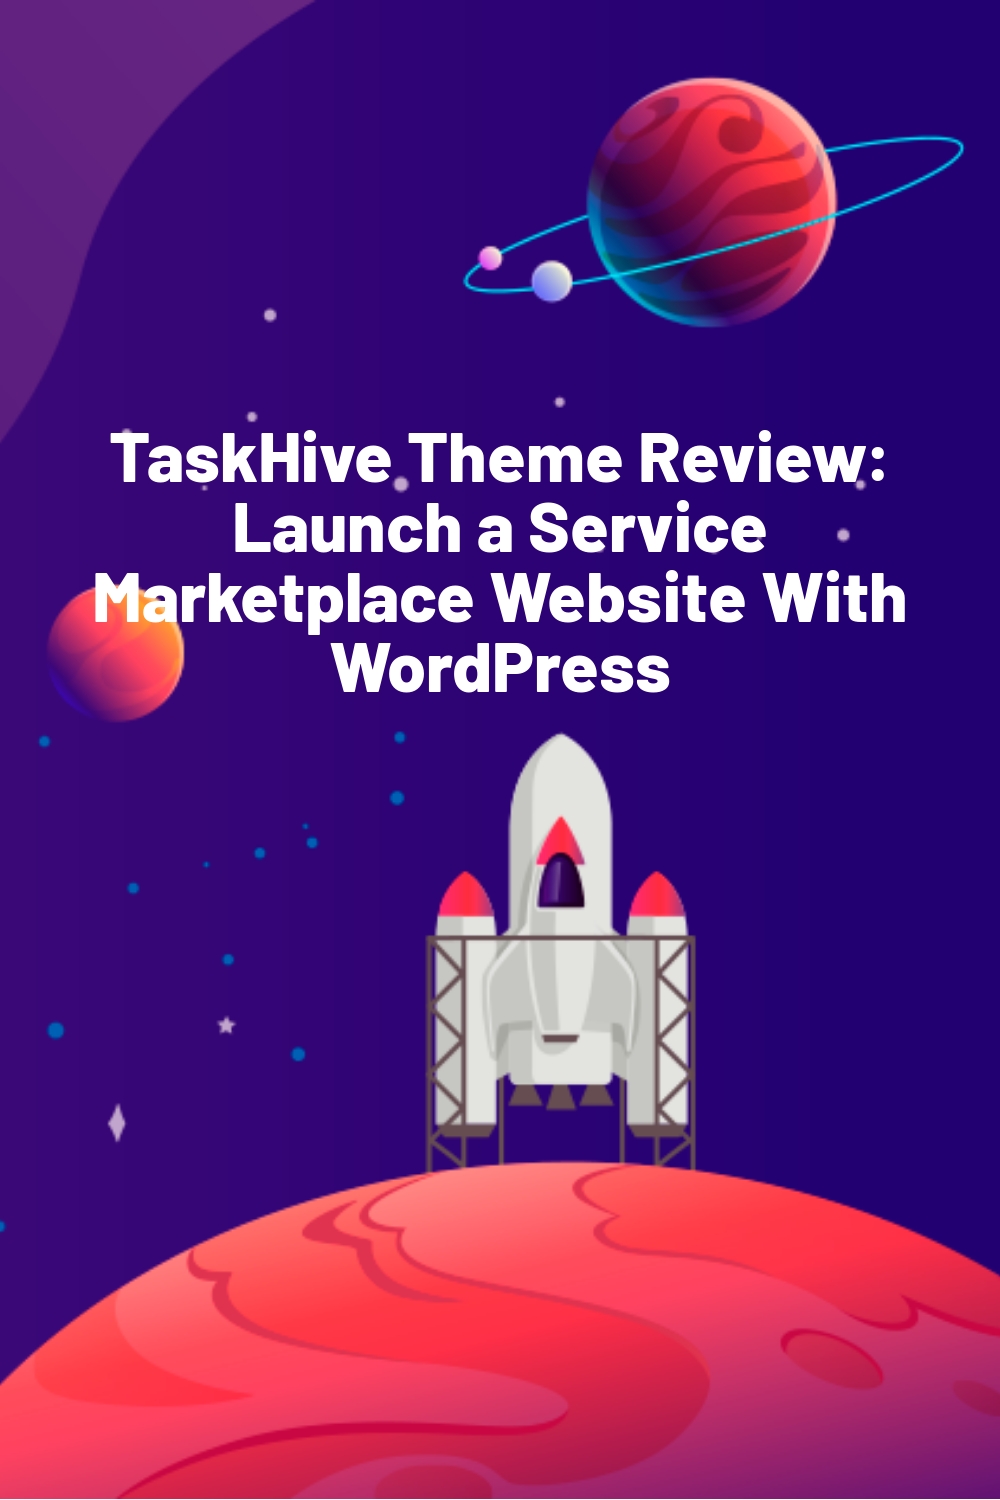 TaskHive Theme Review: Launch a Service Marketplace Website With WordPress